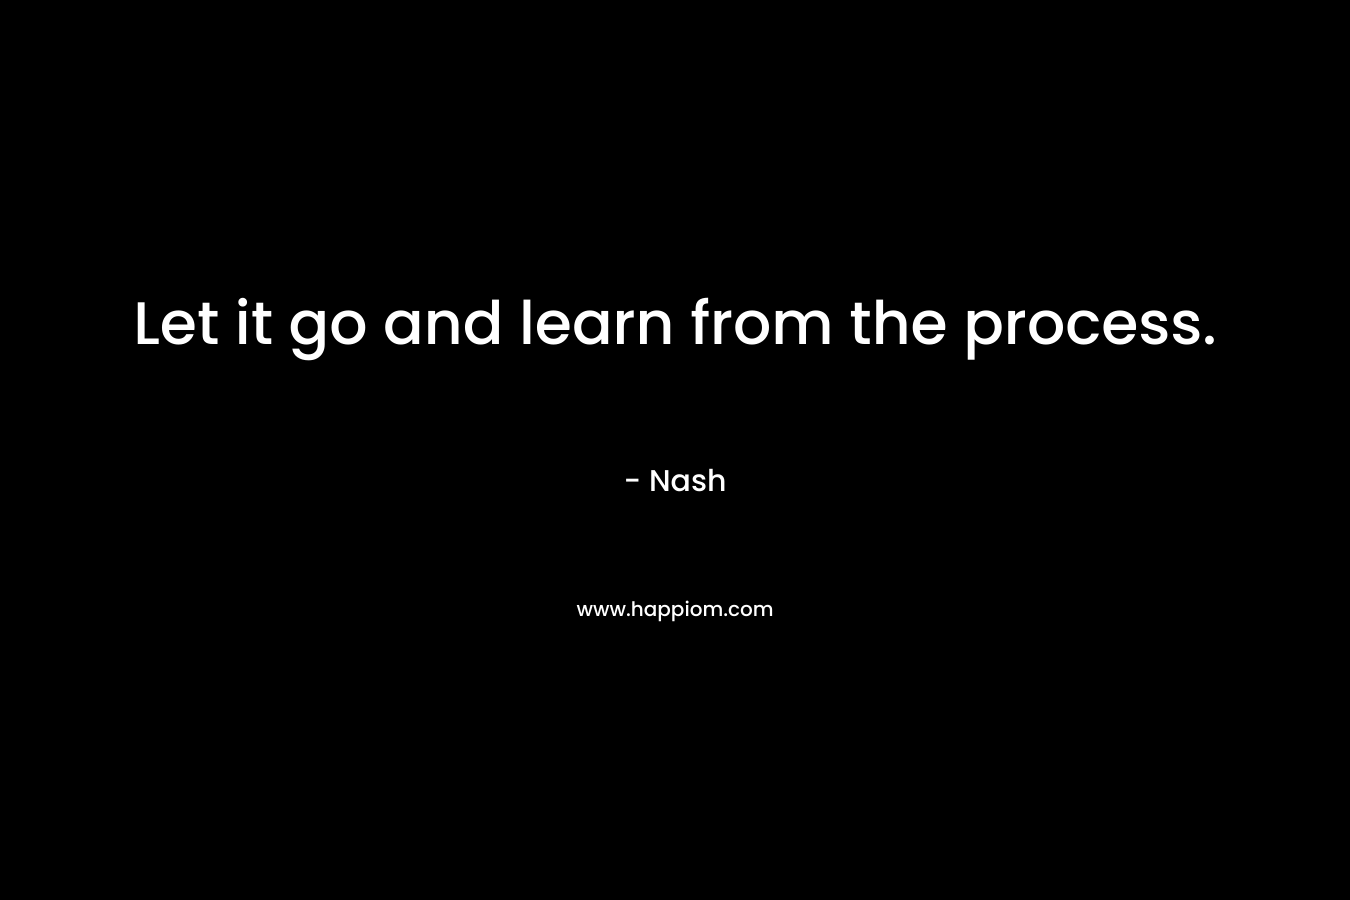 Let it go and learn from the process.